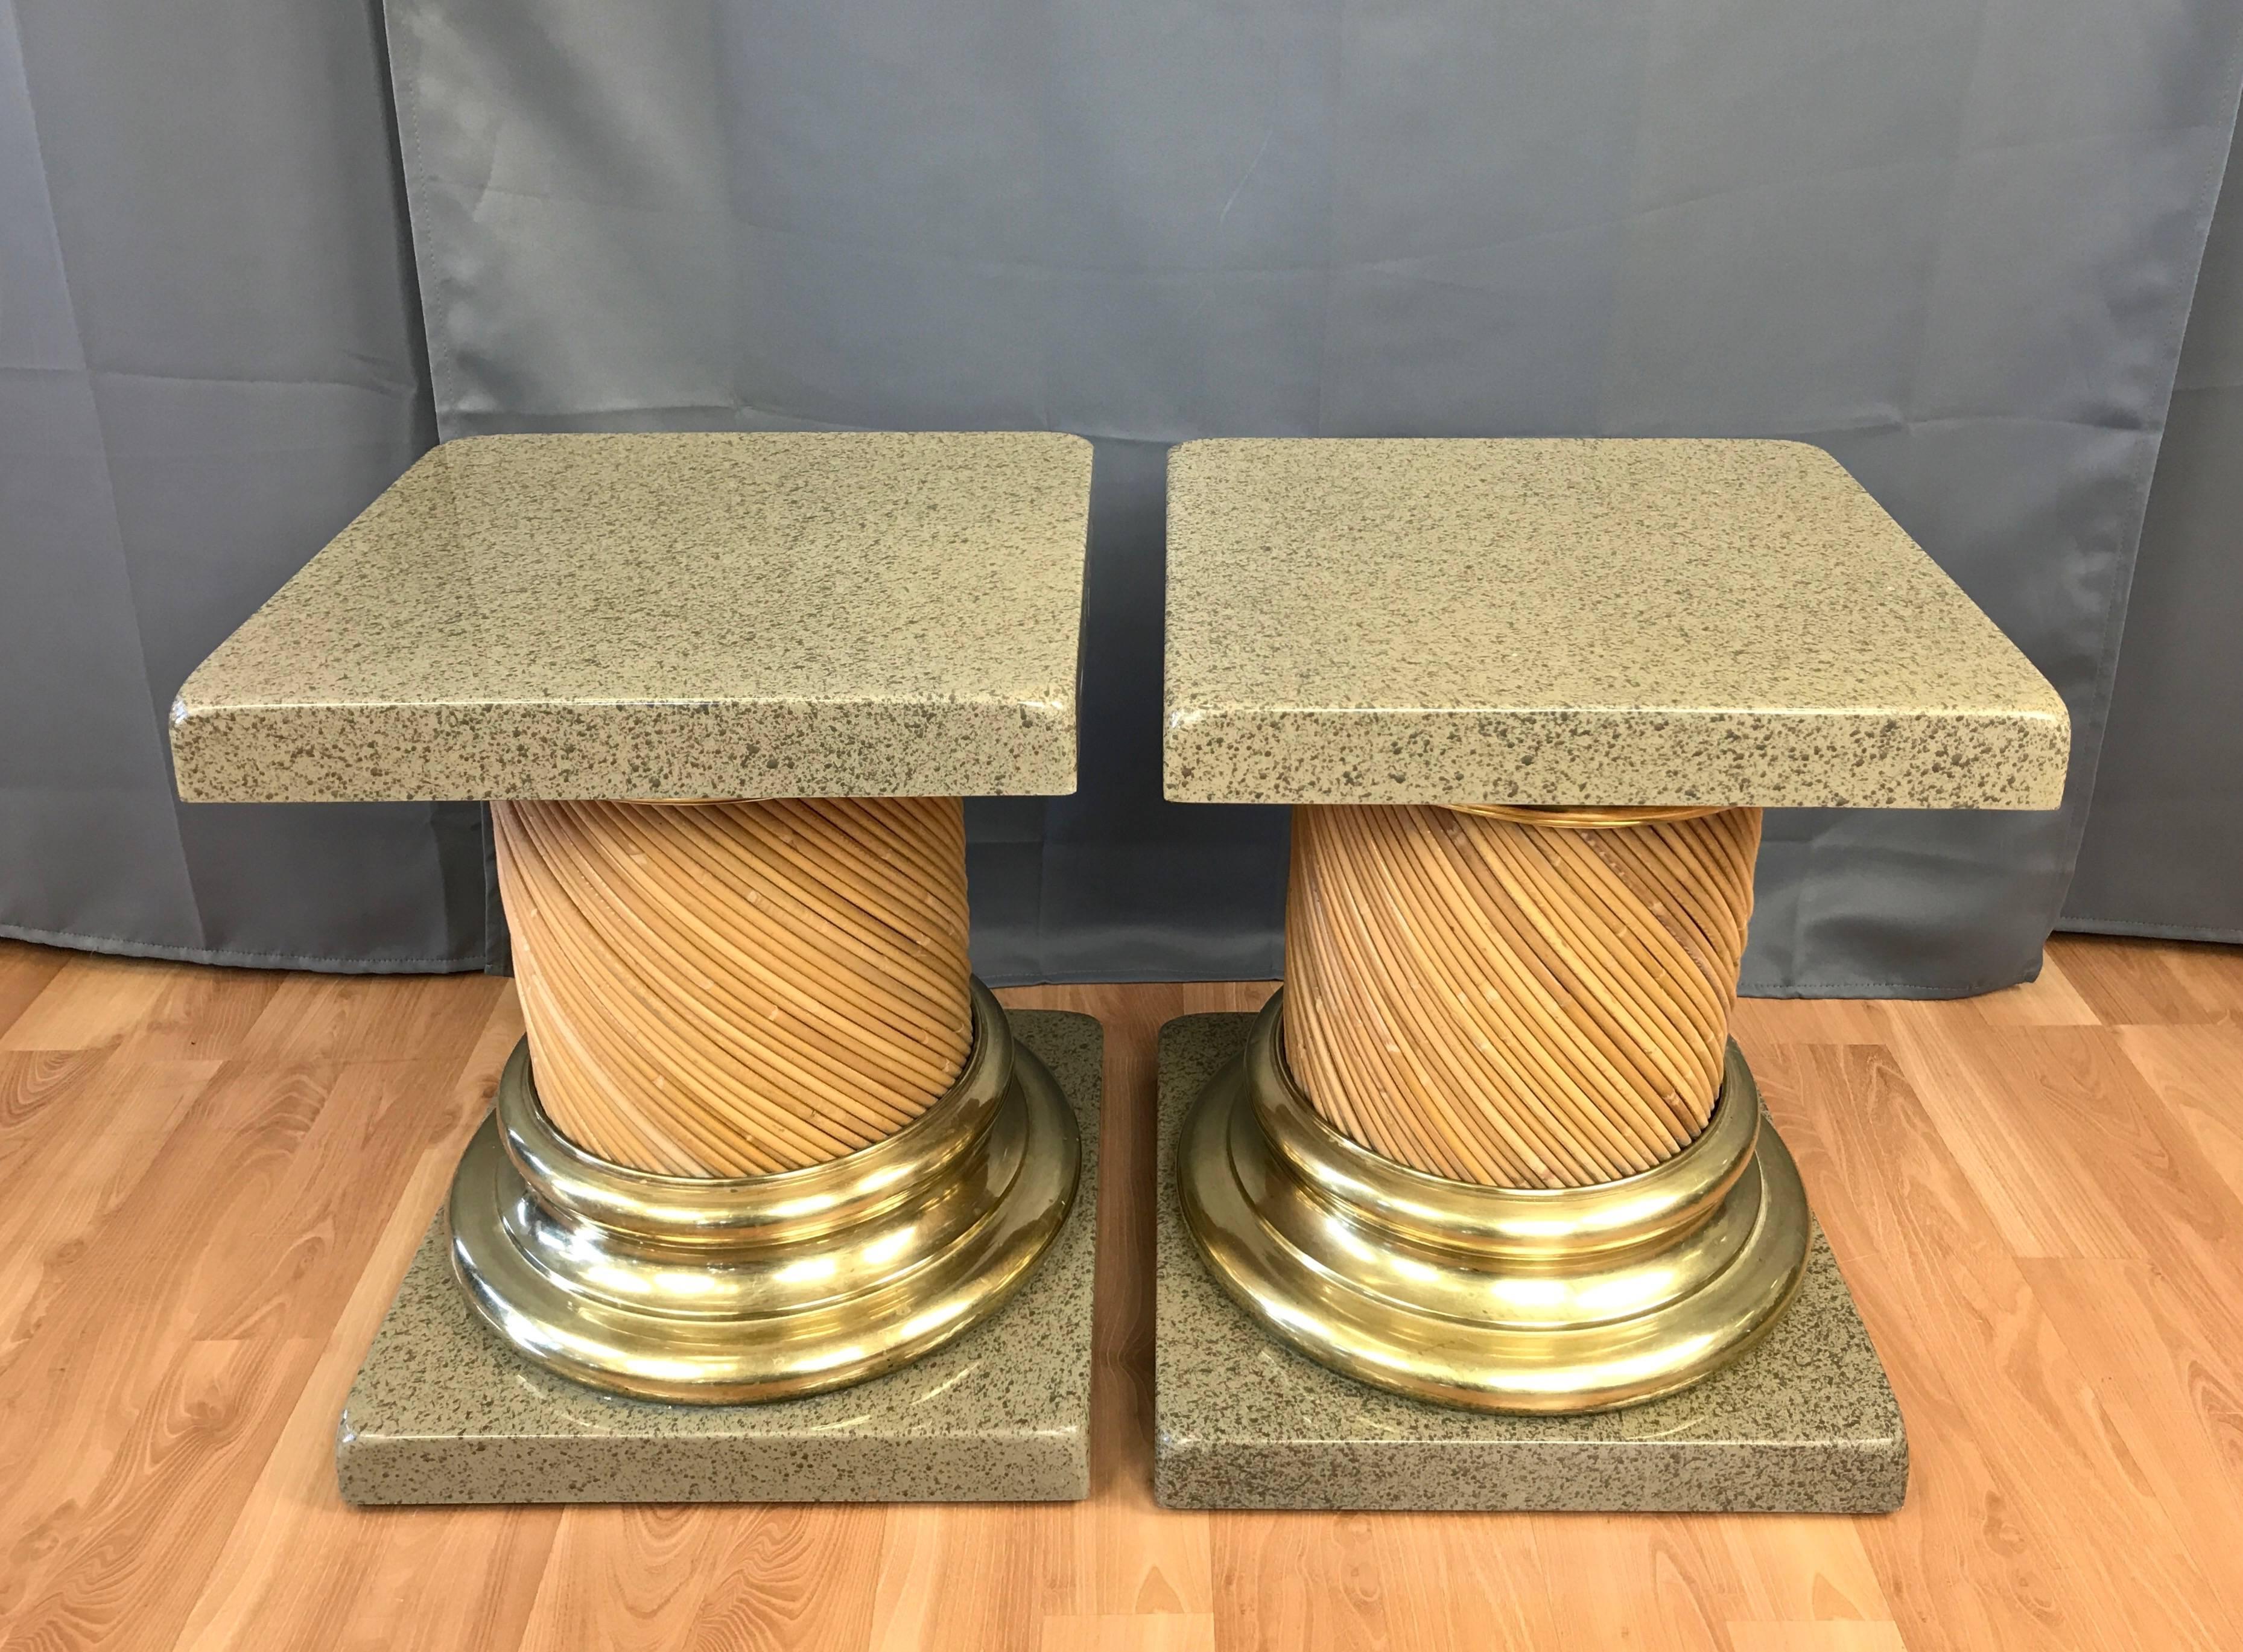 A pair of vintage Tuscan column-style end tables or pedestals with reed barrels, brass collars, and lacquered bases and tops.

Base and top are solid wood with a glossy faux-granite poured lacquer finish. Substantial collars are polished solid